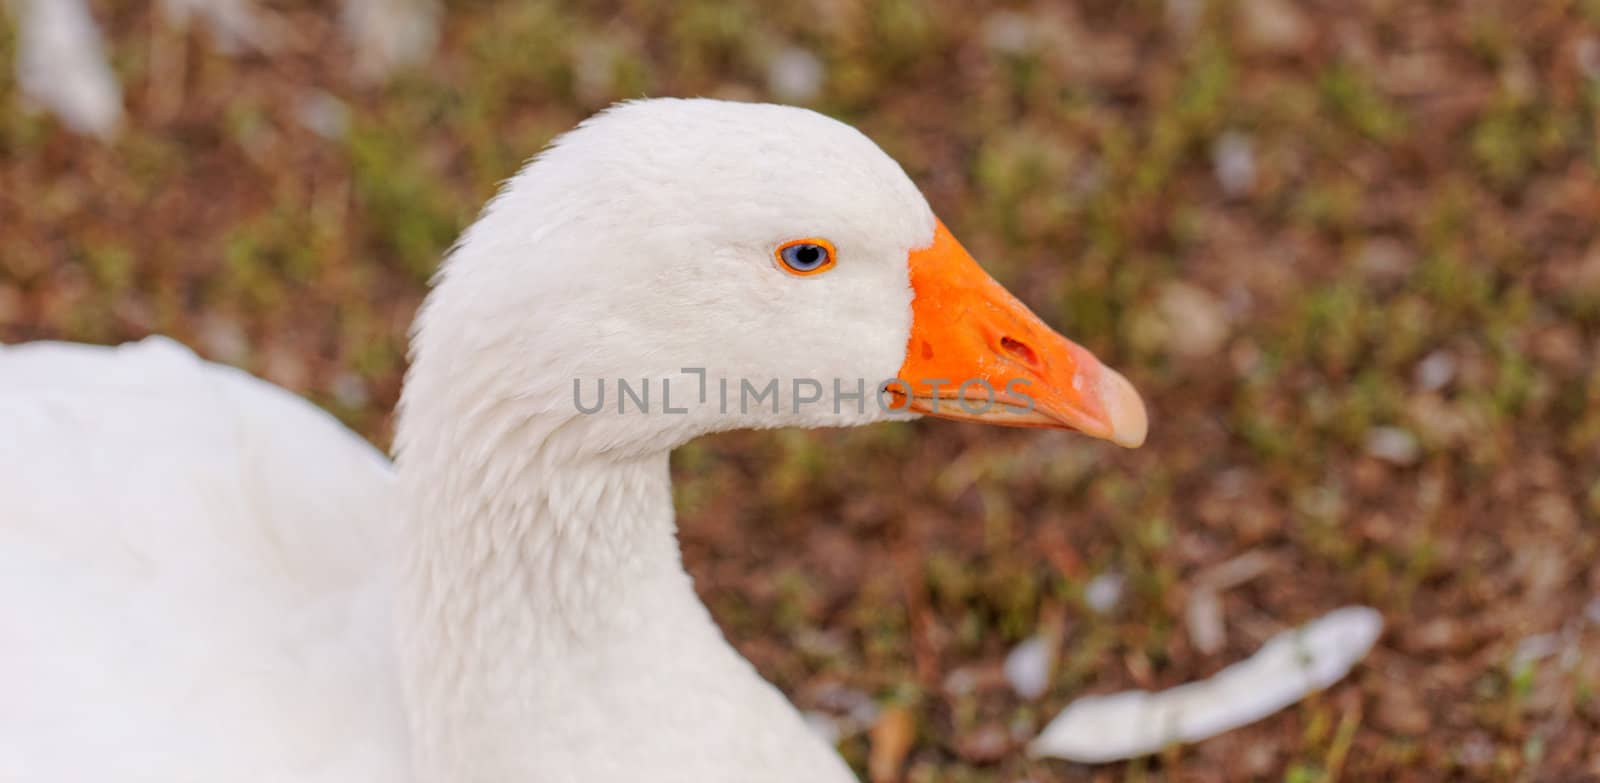 White geese with blue eyes, in farm